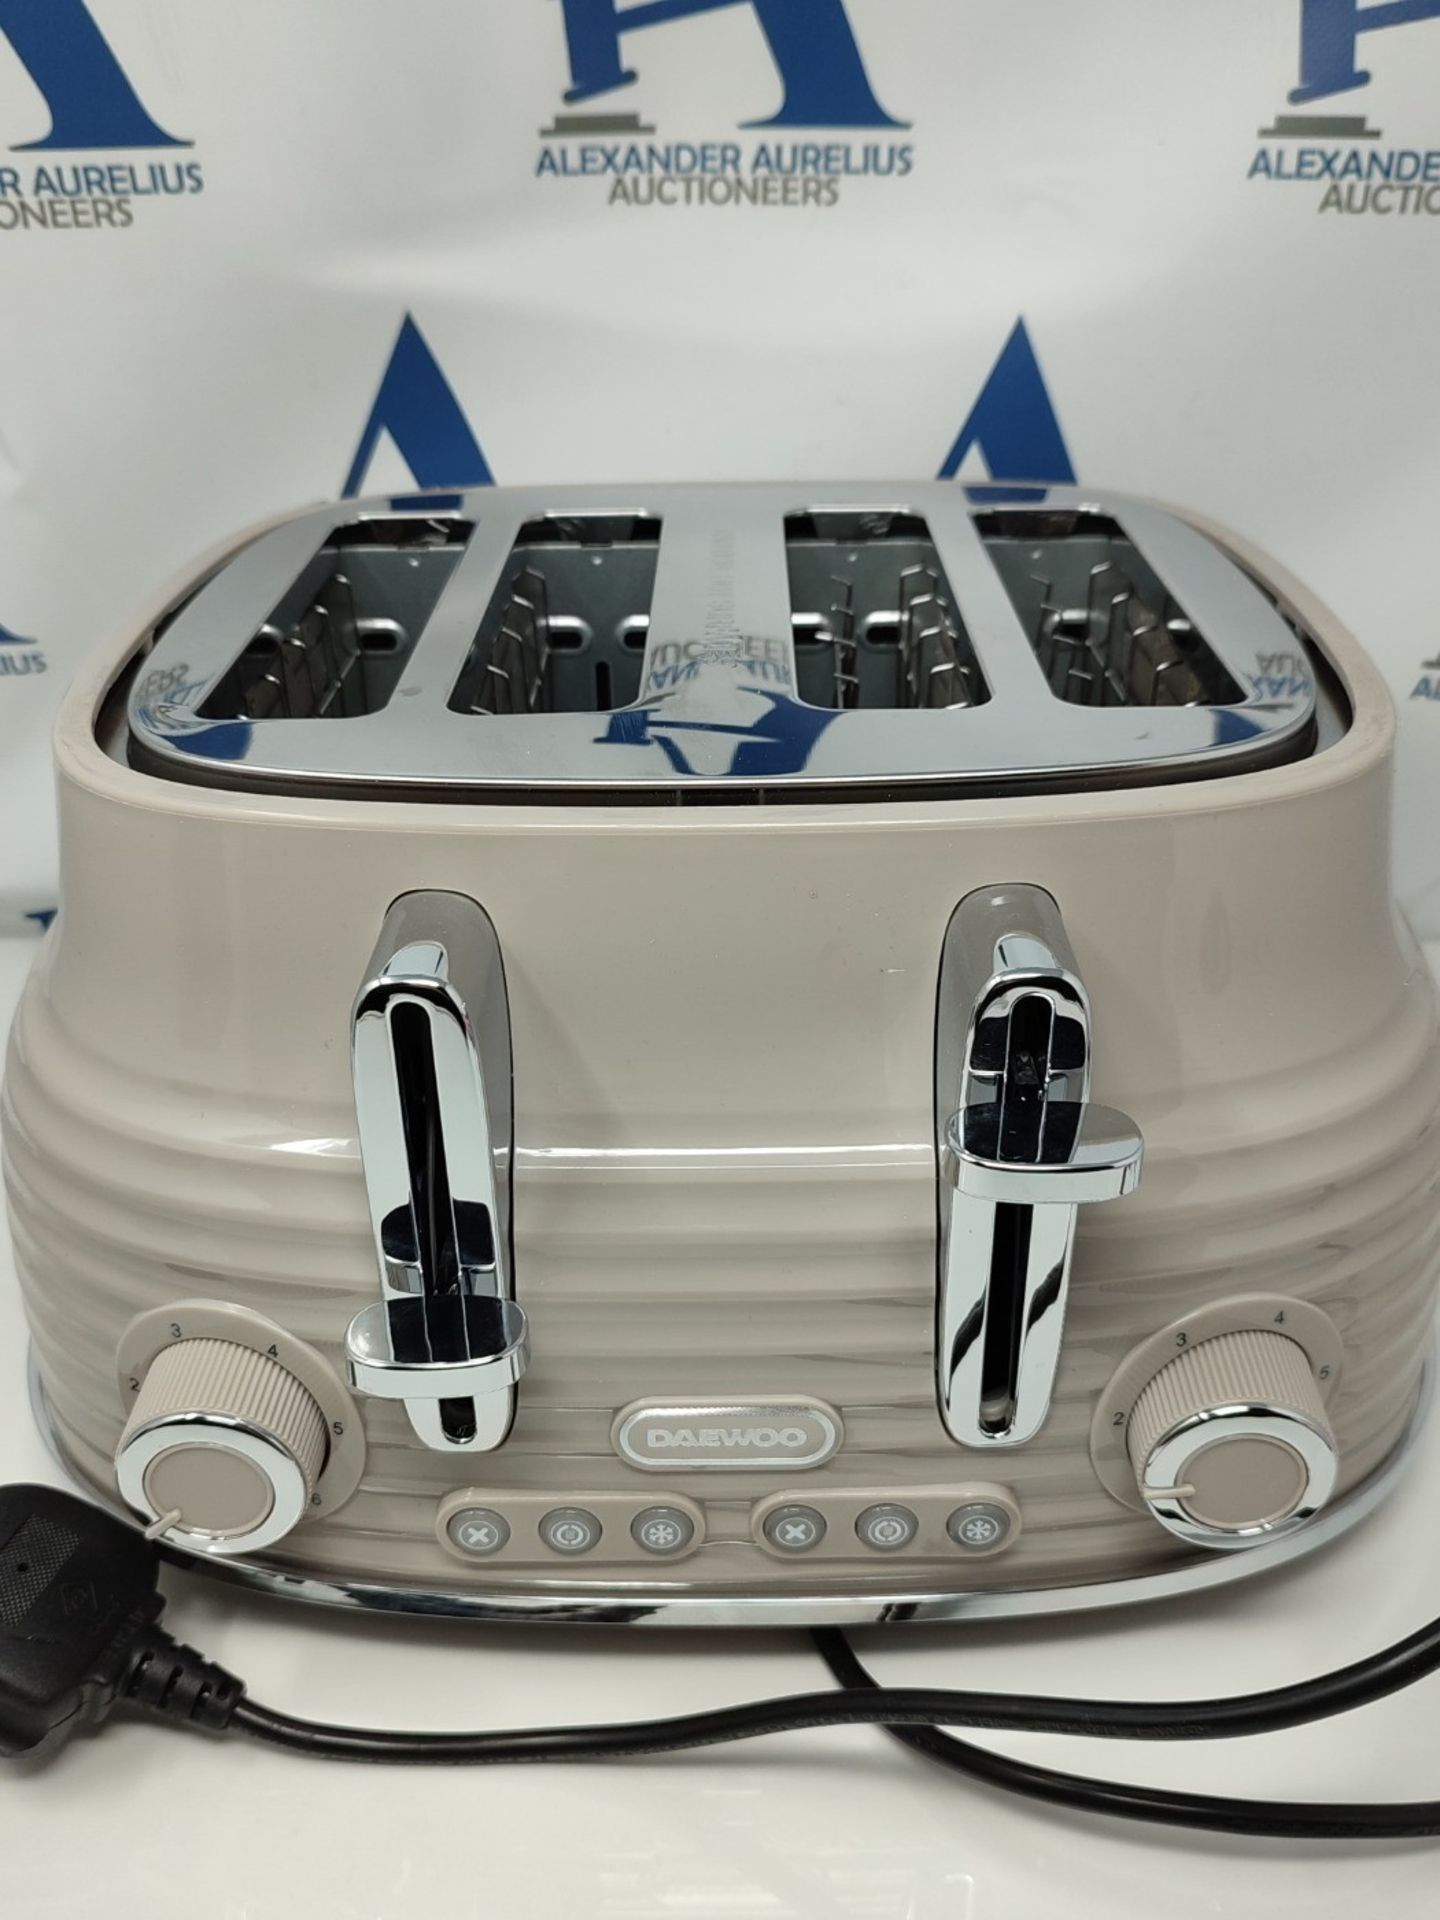 RRP £59.00 Daewoo Sienna Collection 4 Slice Toaster, Adjustable Browning Controls, Cancel, Defros - Image 2 of 2